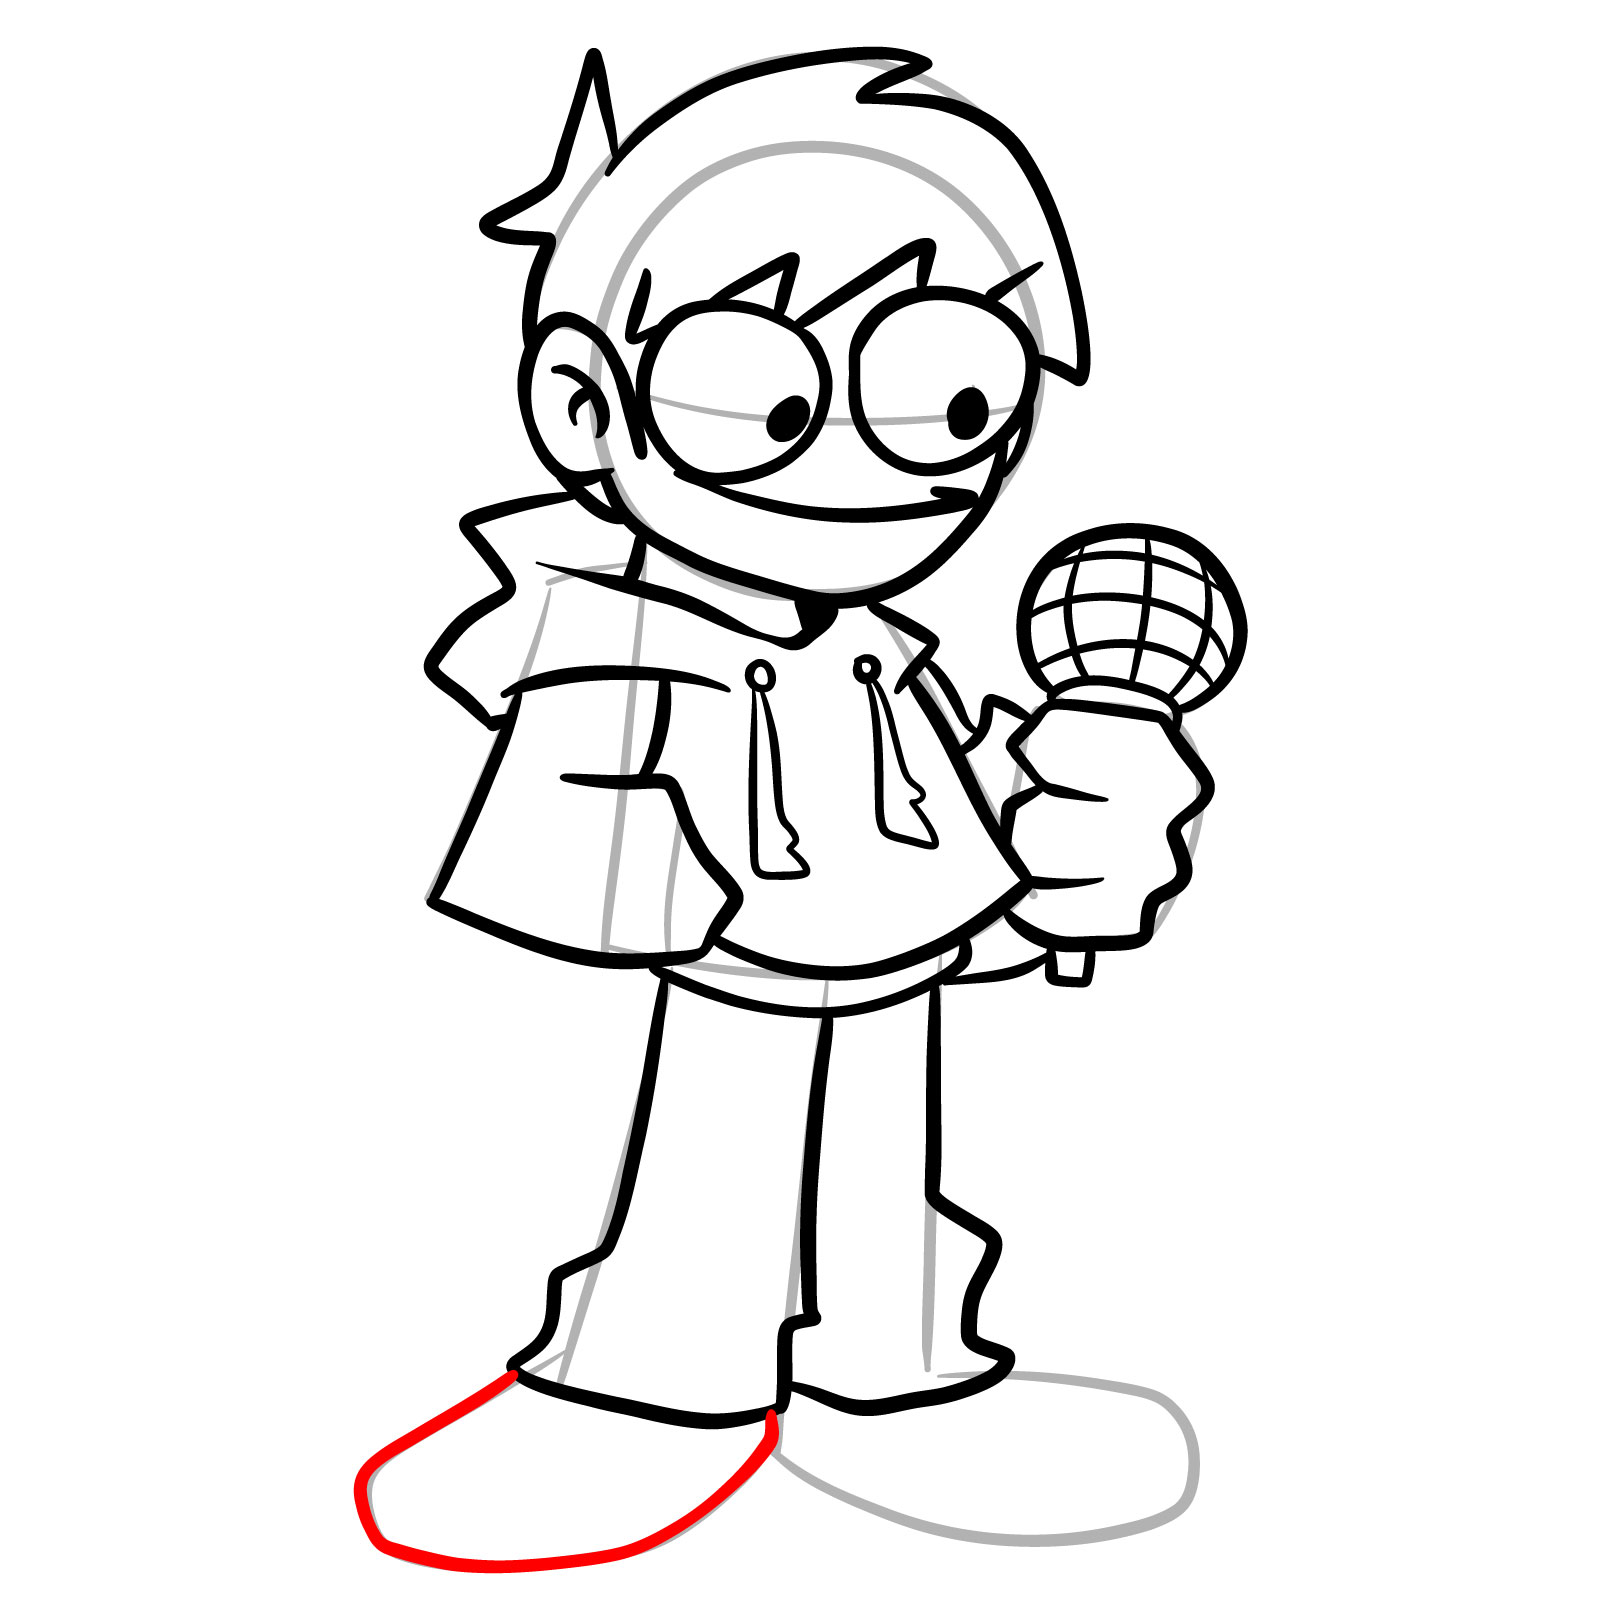 How to draw Edd from Online Vs - step 24